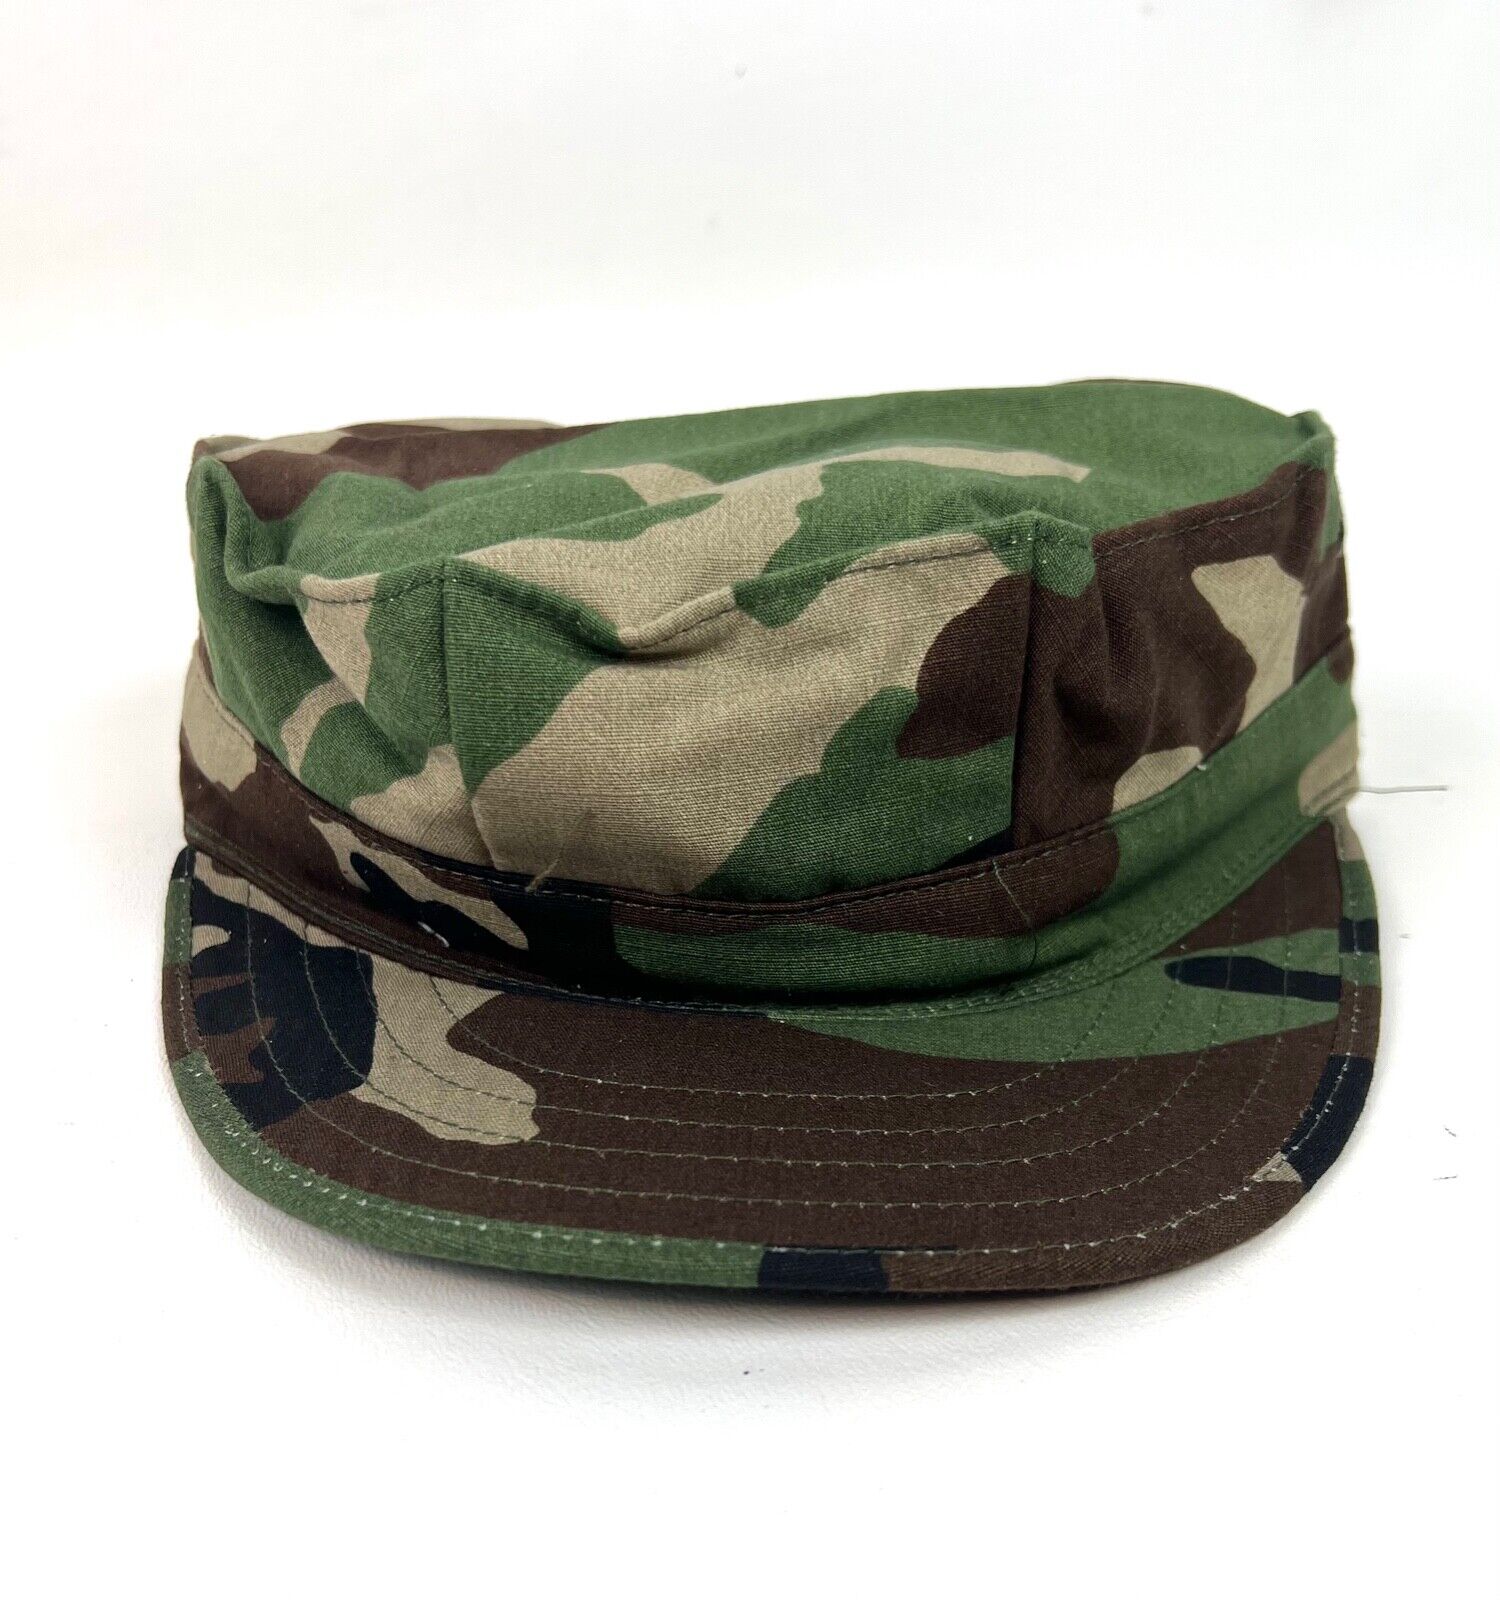 New US Military Navy Utility BDU Woodland 8 Point Cap Hat Size Large